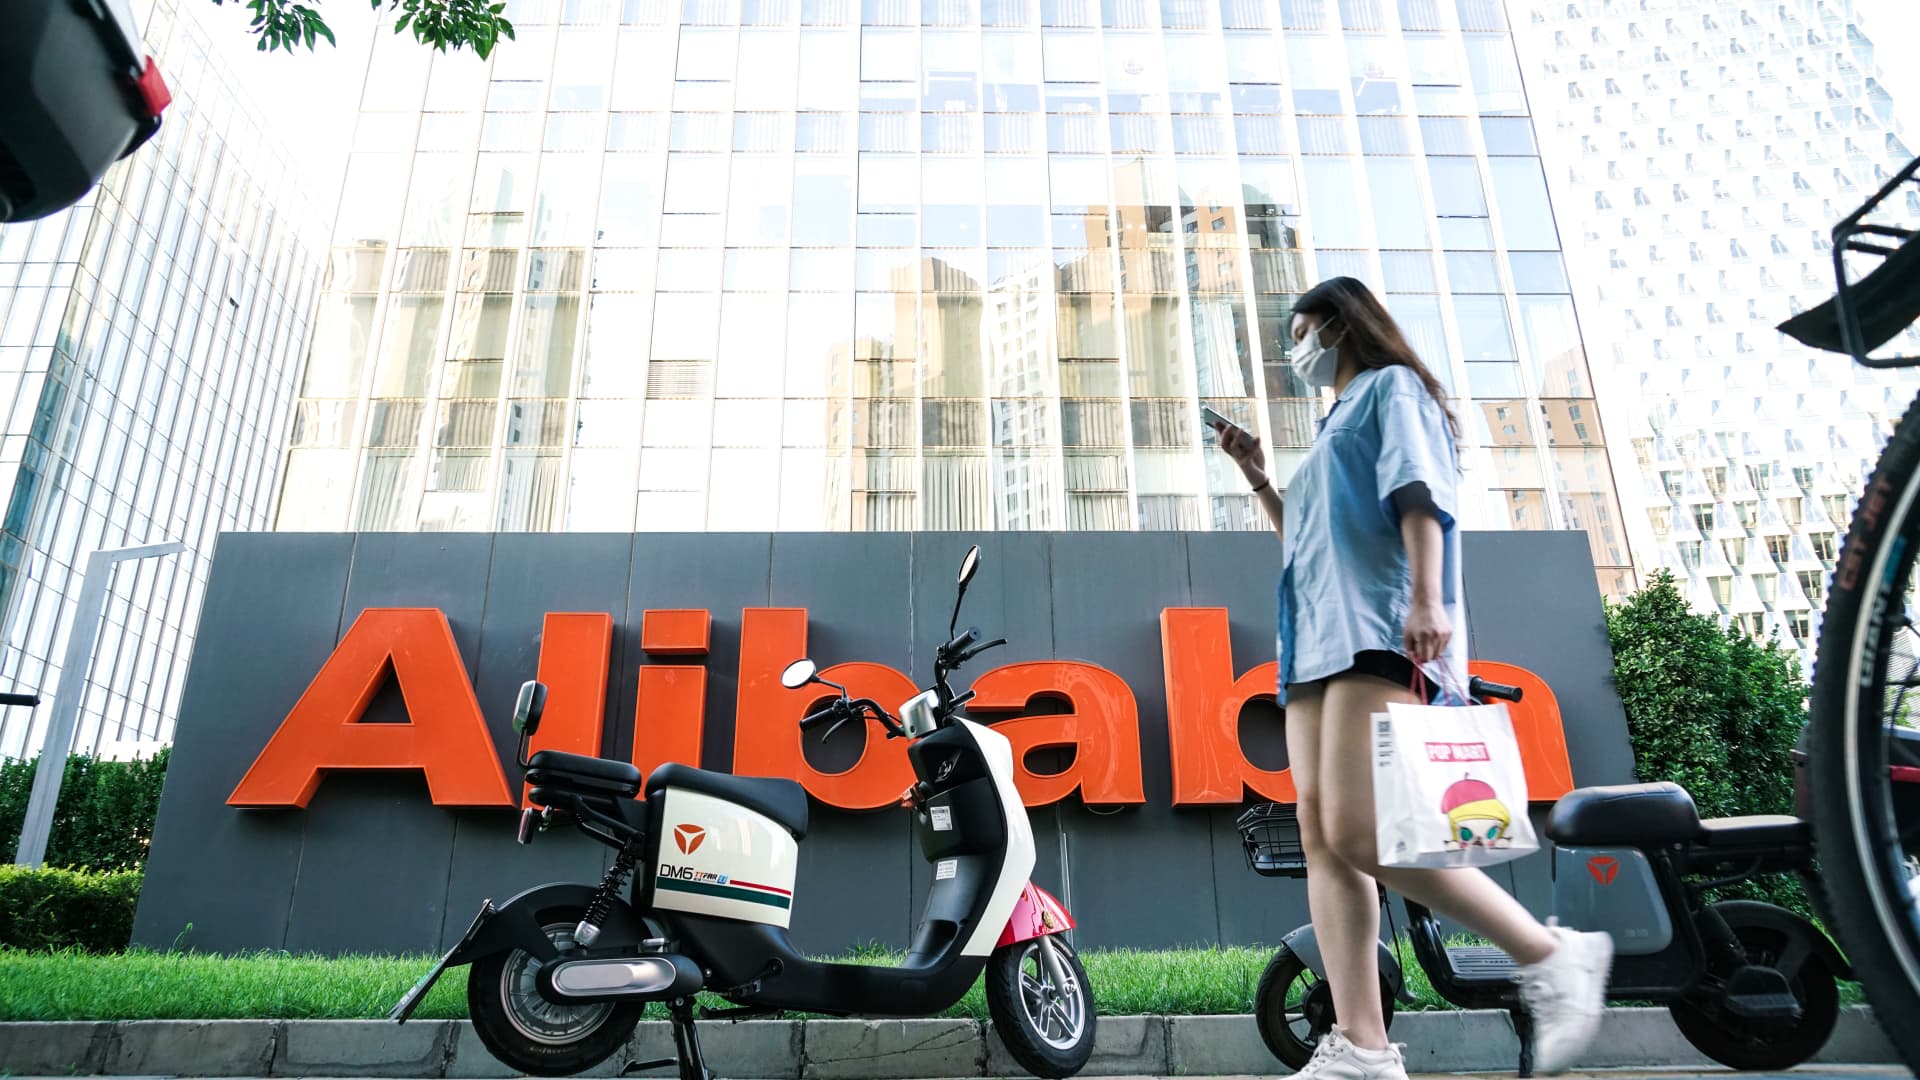 Alibaba to separate into 6 devices and explore IPOs; shares pop 9%